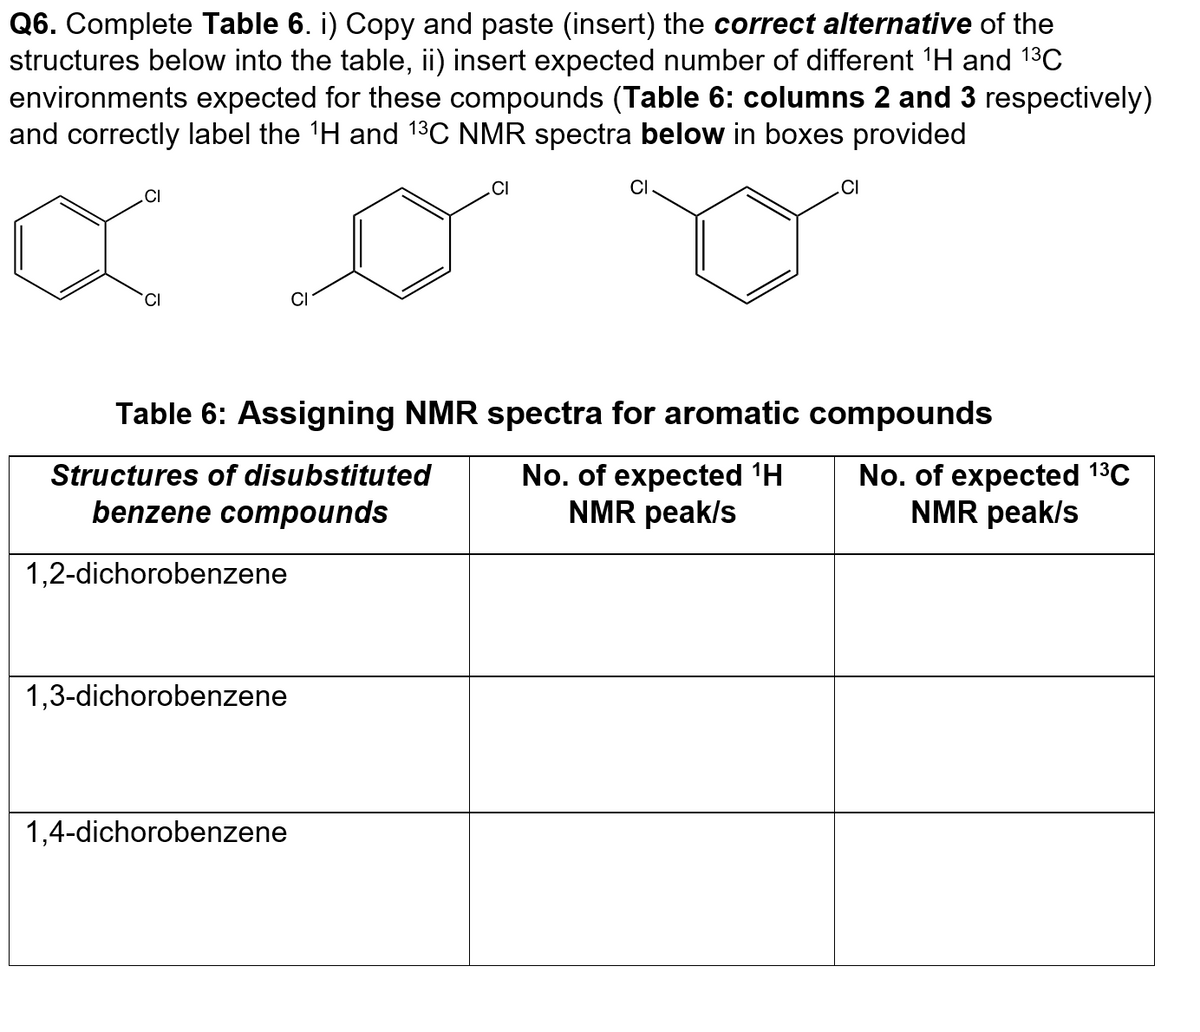 Q6. Complete Table 6. i) Copy and paste (insert) the correct alternative of the
structures below into the table, ii) insert expected number of different ¹H and 1³C
environments expected for these compounds (Table 6: columns 2 and 3 respectively)
and correctly label the ¹H and ¹³C NMR spectra below in boxes provided
.CI
CI
Table 6: Assigning NMR spectra for aromatic
Structures of disubstituted
No. of expected ¹H
NMR peak/s
benzene compounds
1,2-dichorobenzene
1,3-dichorobenzene
.CI
1,4-dichorobenzene
CI
compounds
No. of expected ¹³℃
NMR peak/s